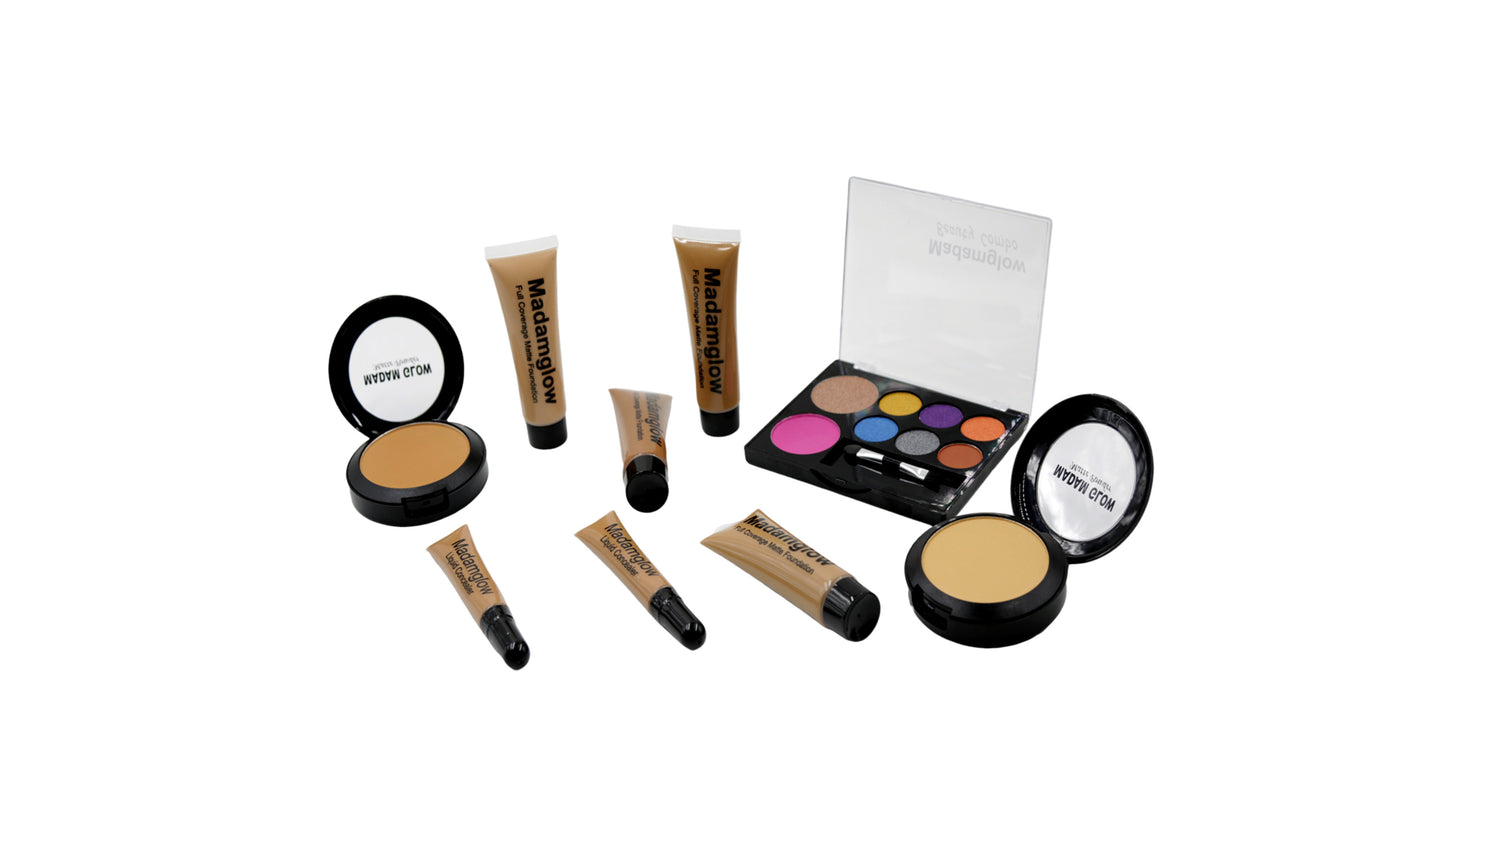 Madamglow Makeup, pressed powder, foundation, concealer , highlighter beauty combo